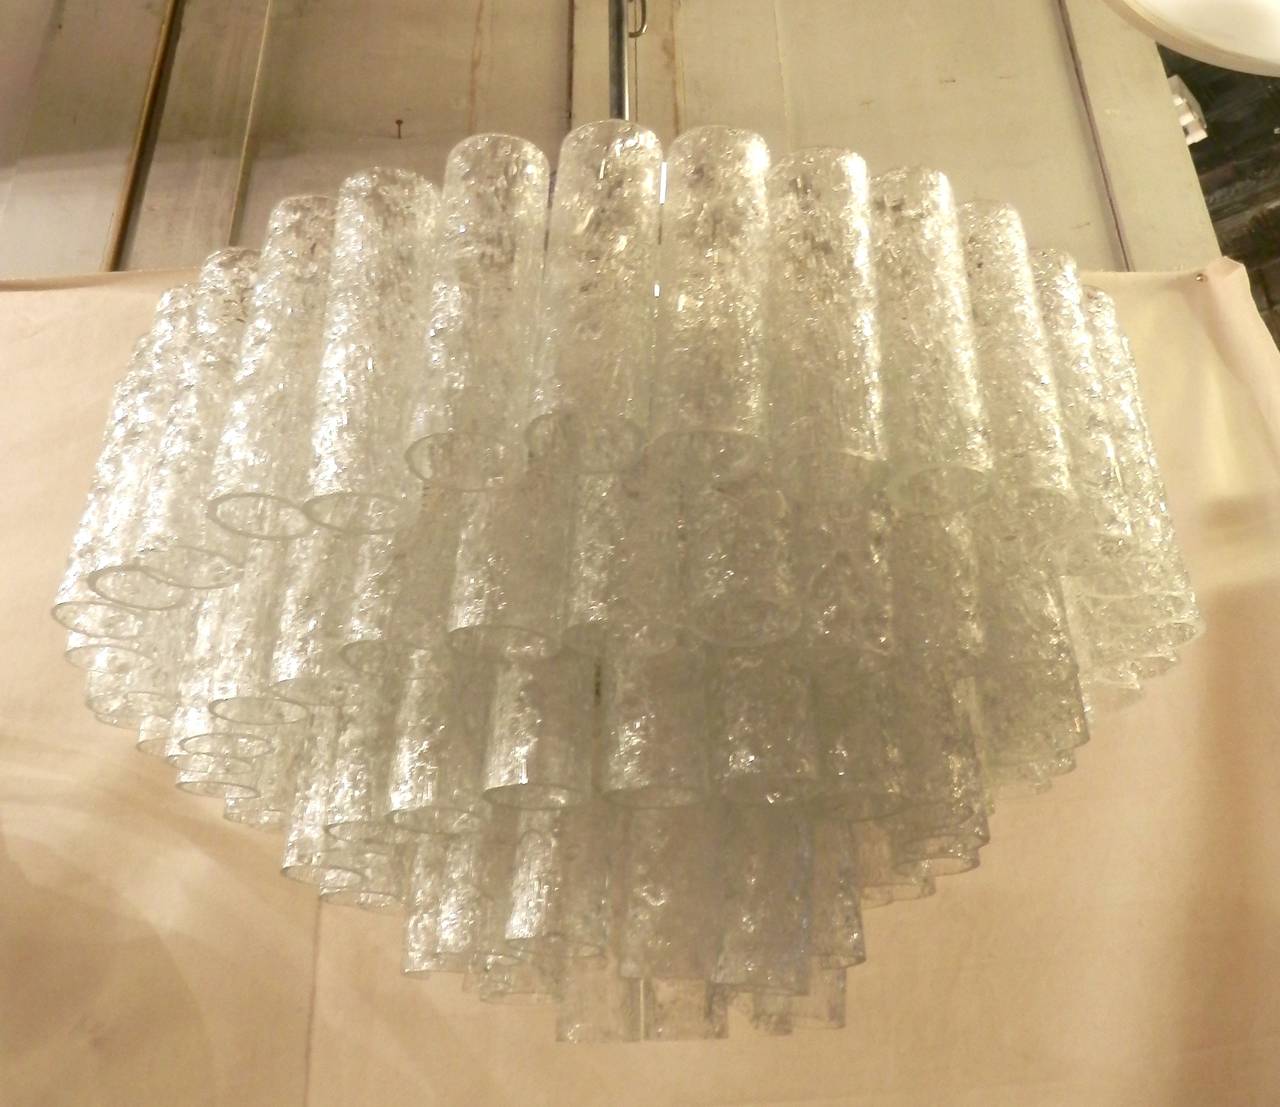 Elegant chandelier with beautiful array of cascading crackled glass pendants. Excellent lighting with sockets for up to ten bulbs. Long chrome stem and frame with semi-clear glass suspended.

(Please confirm item location - NY or NJ - with dealer)